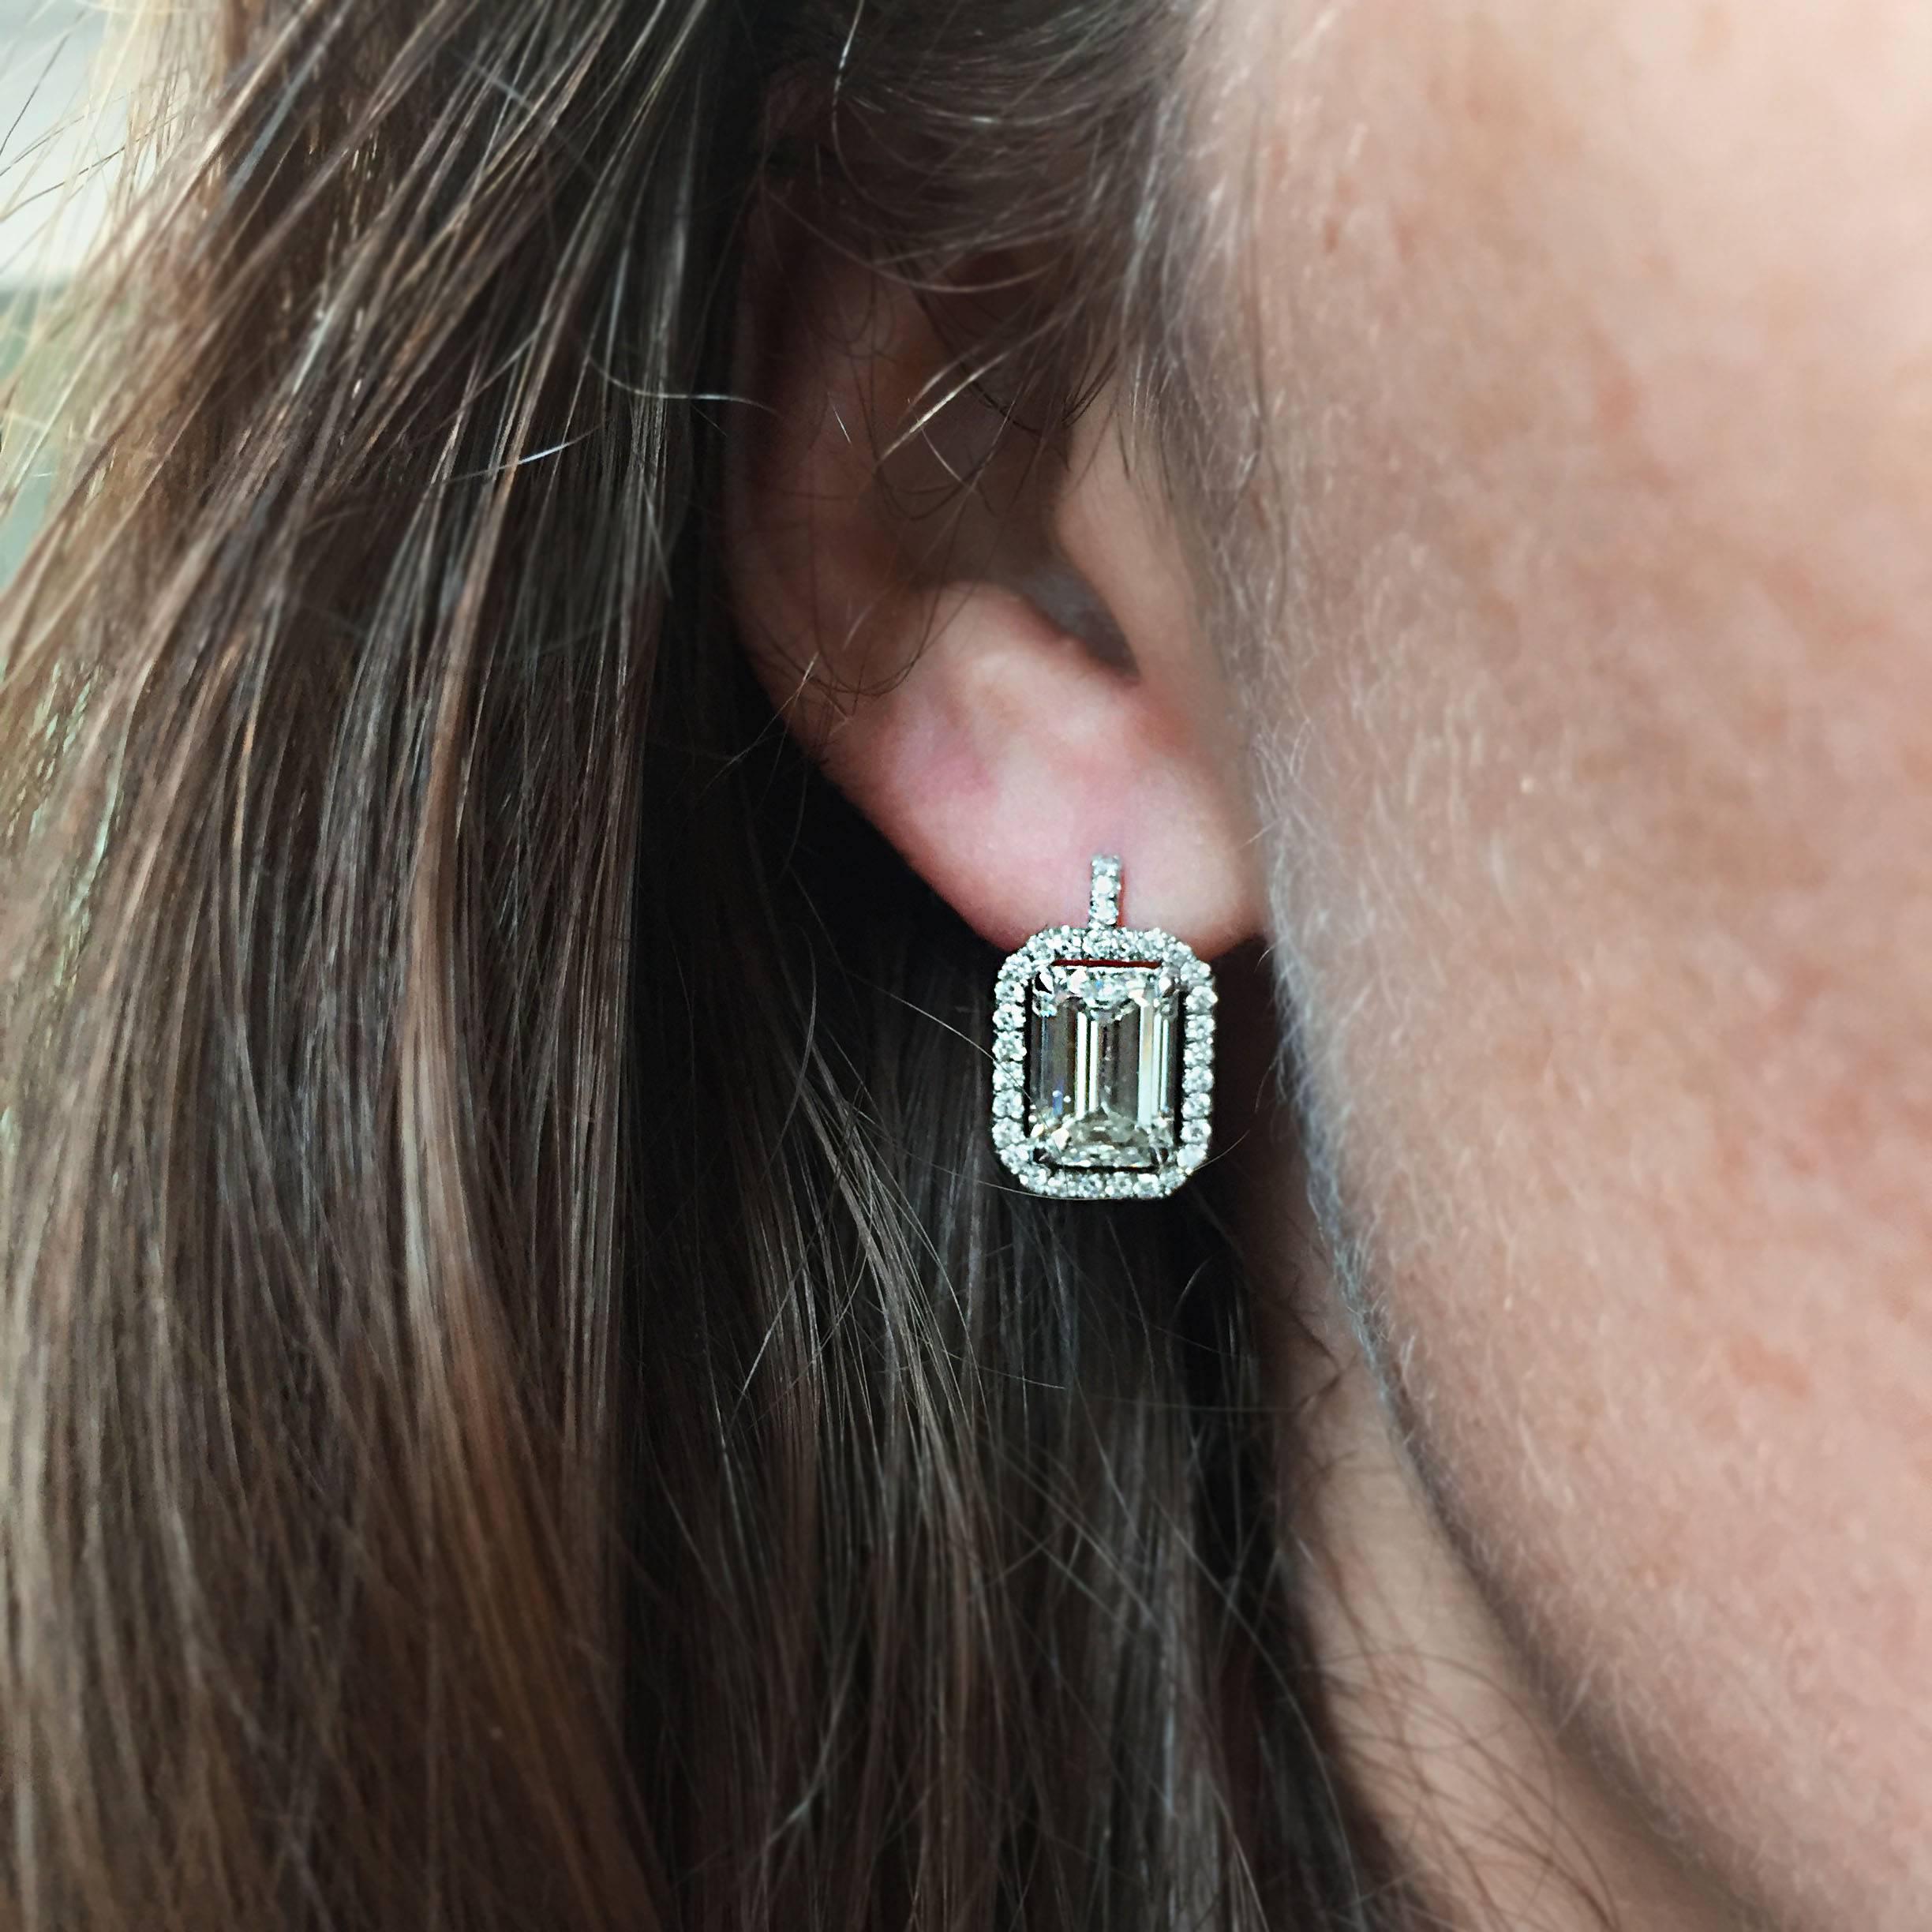 A lovely pair of 18k white gold drop earrings feature two emerald-cut diamonds prong set in a pave halo design. The two large diamonds have I color and VS2 clarity, and weigh 3.24 carats and 3.58 carats, respectively. Earrings contain 62 round-cut